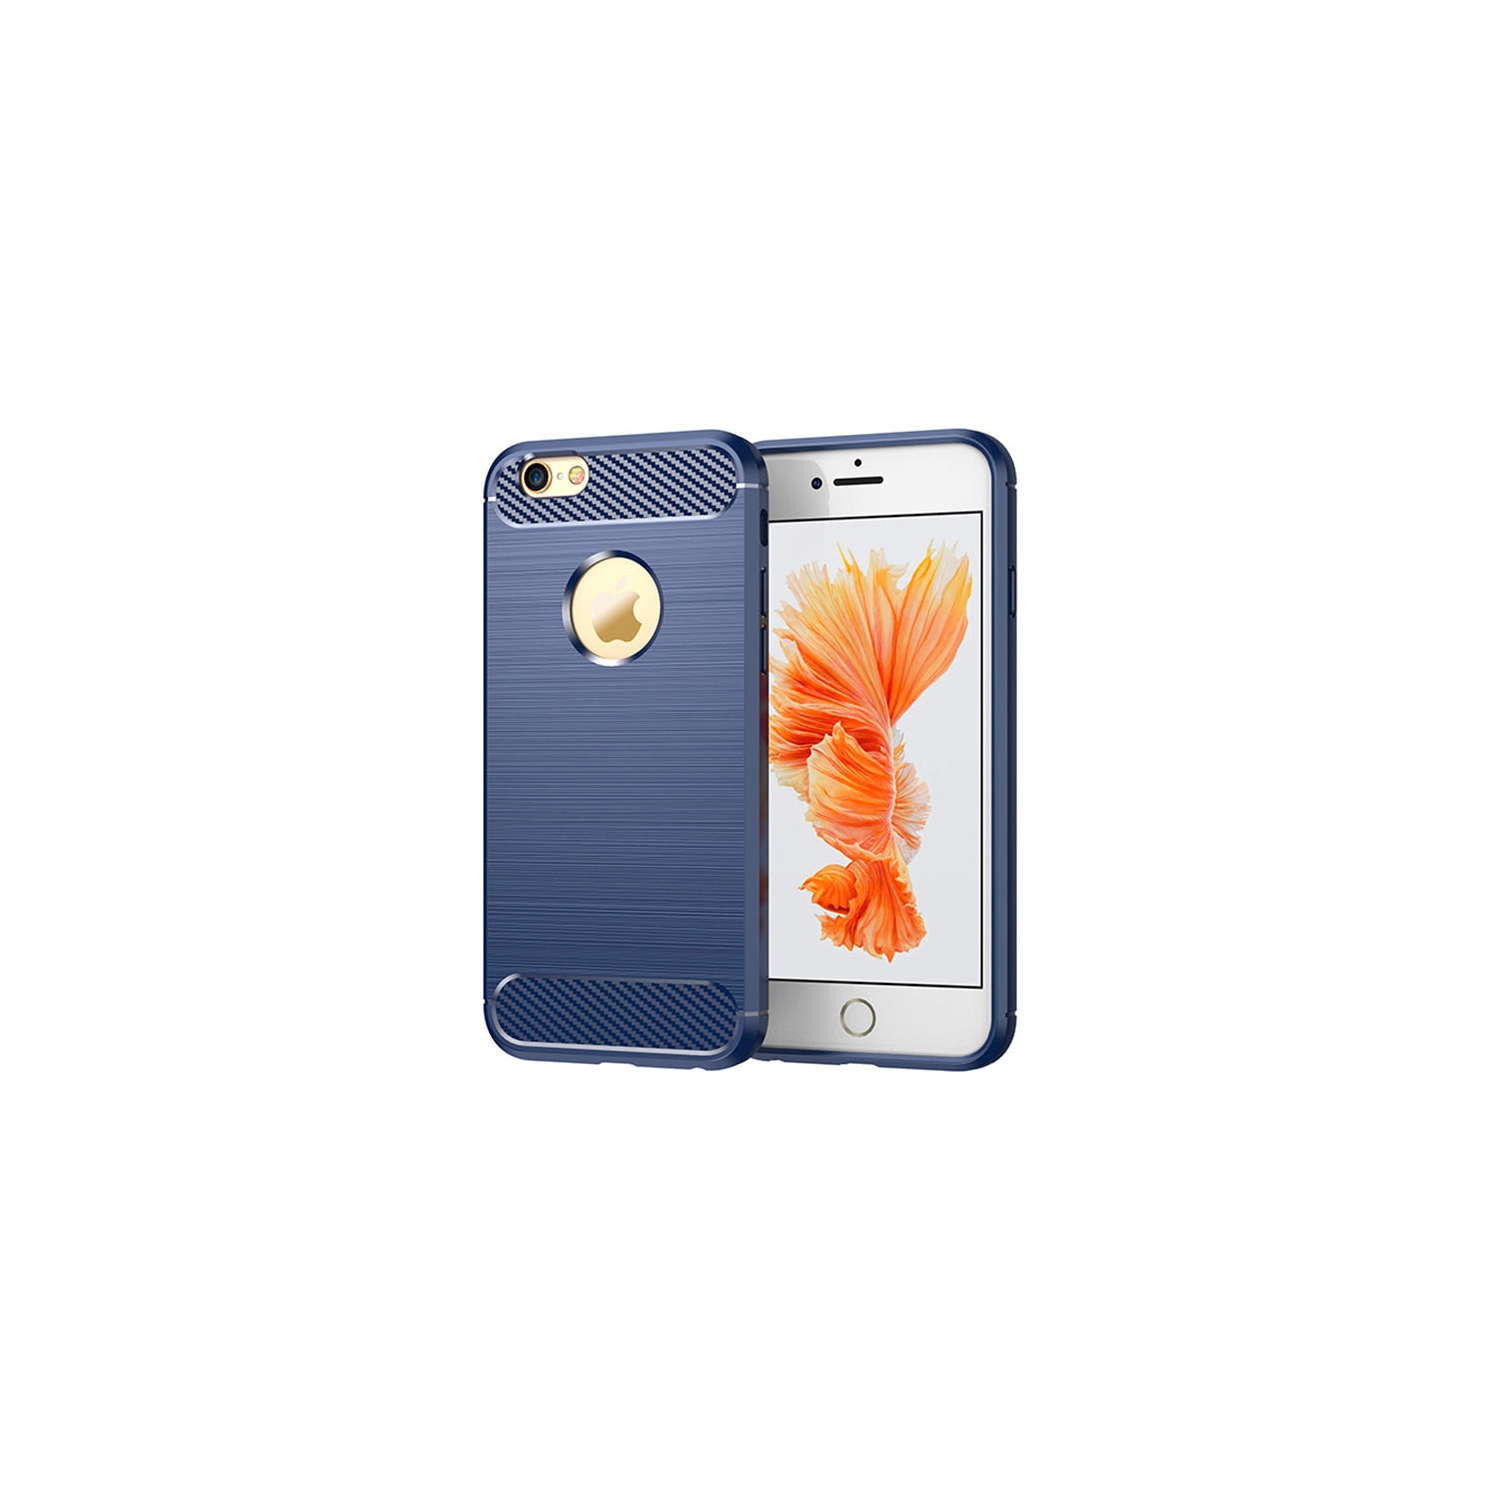 PANDACO Navy Brushed Metal Case for iPhone 6 or iPhone 6S